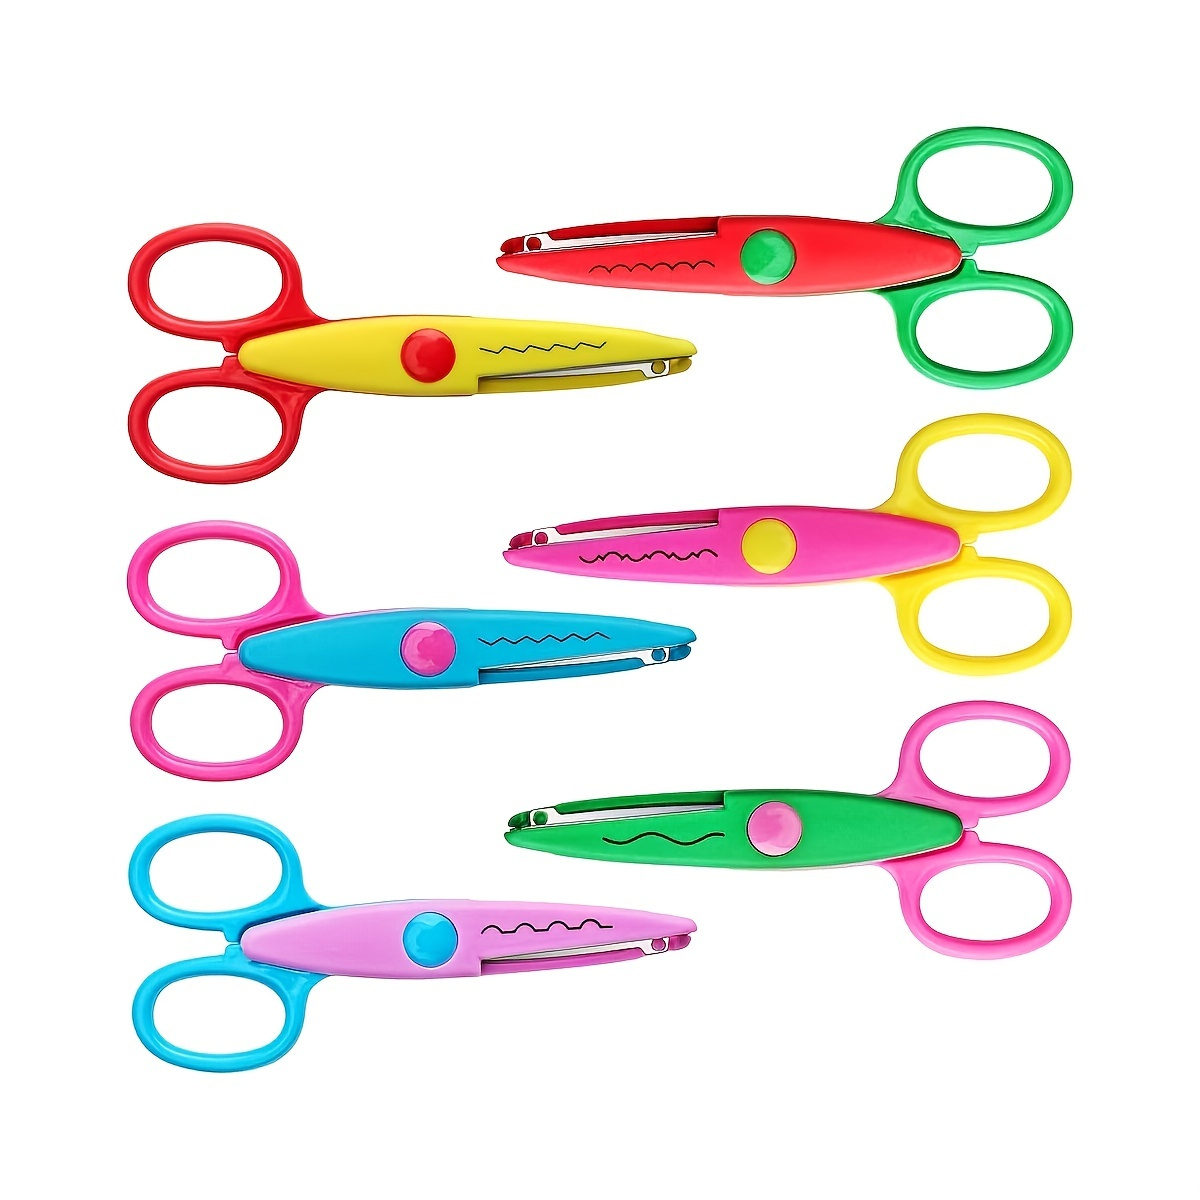  Colorful Craft Scissor Set with Decorative Edge in 6 Patterns  Available for Left and Right Handed Safe for Kids Decorative Scissors for  DIY, Scrapbooking, Kids Crafts to Make Smooth Cuts 6